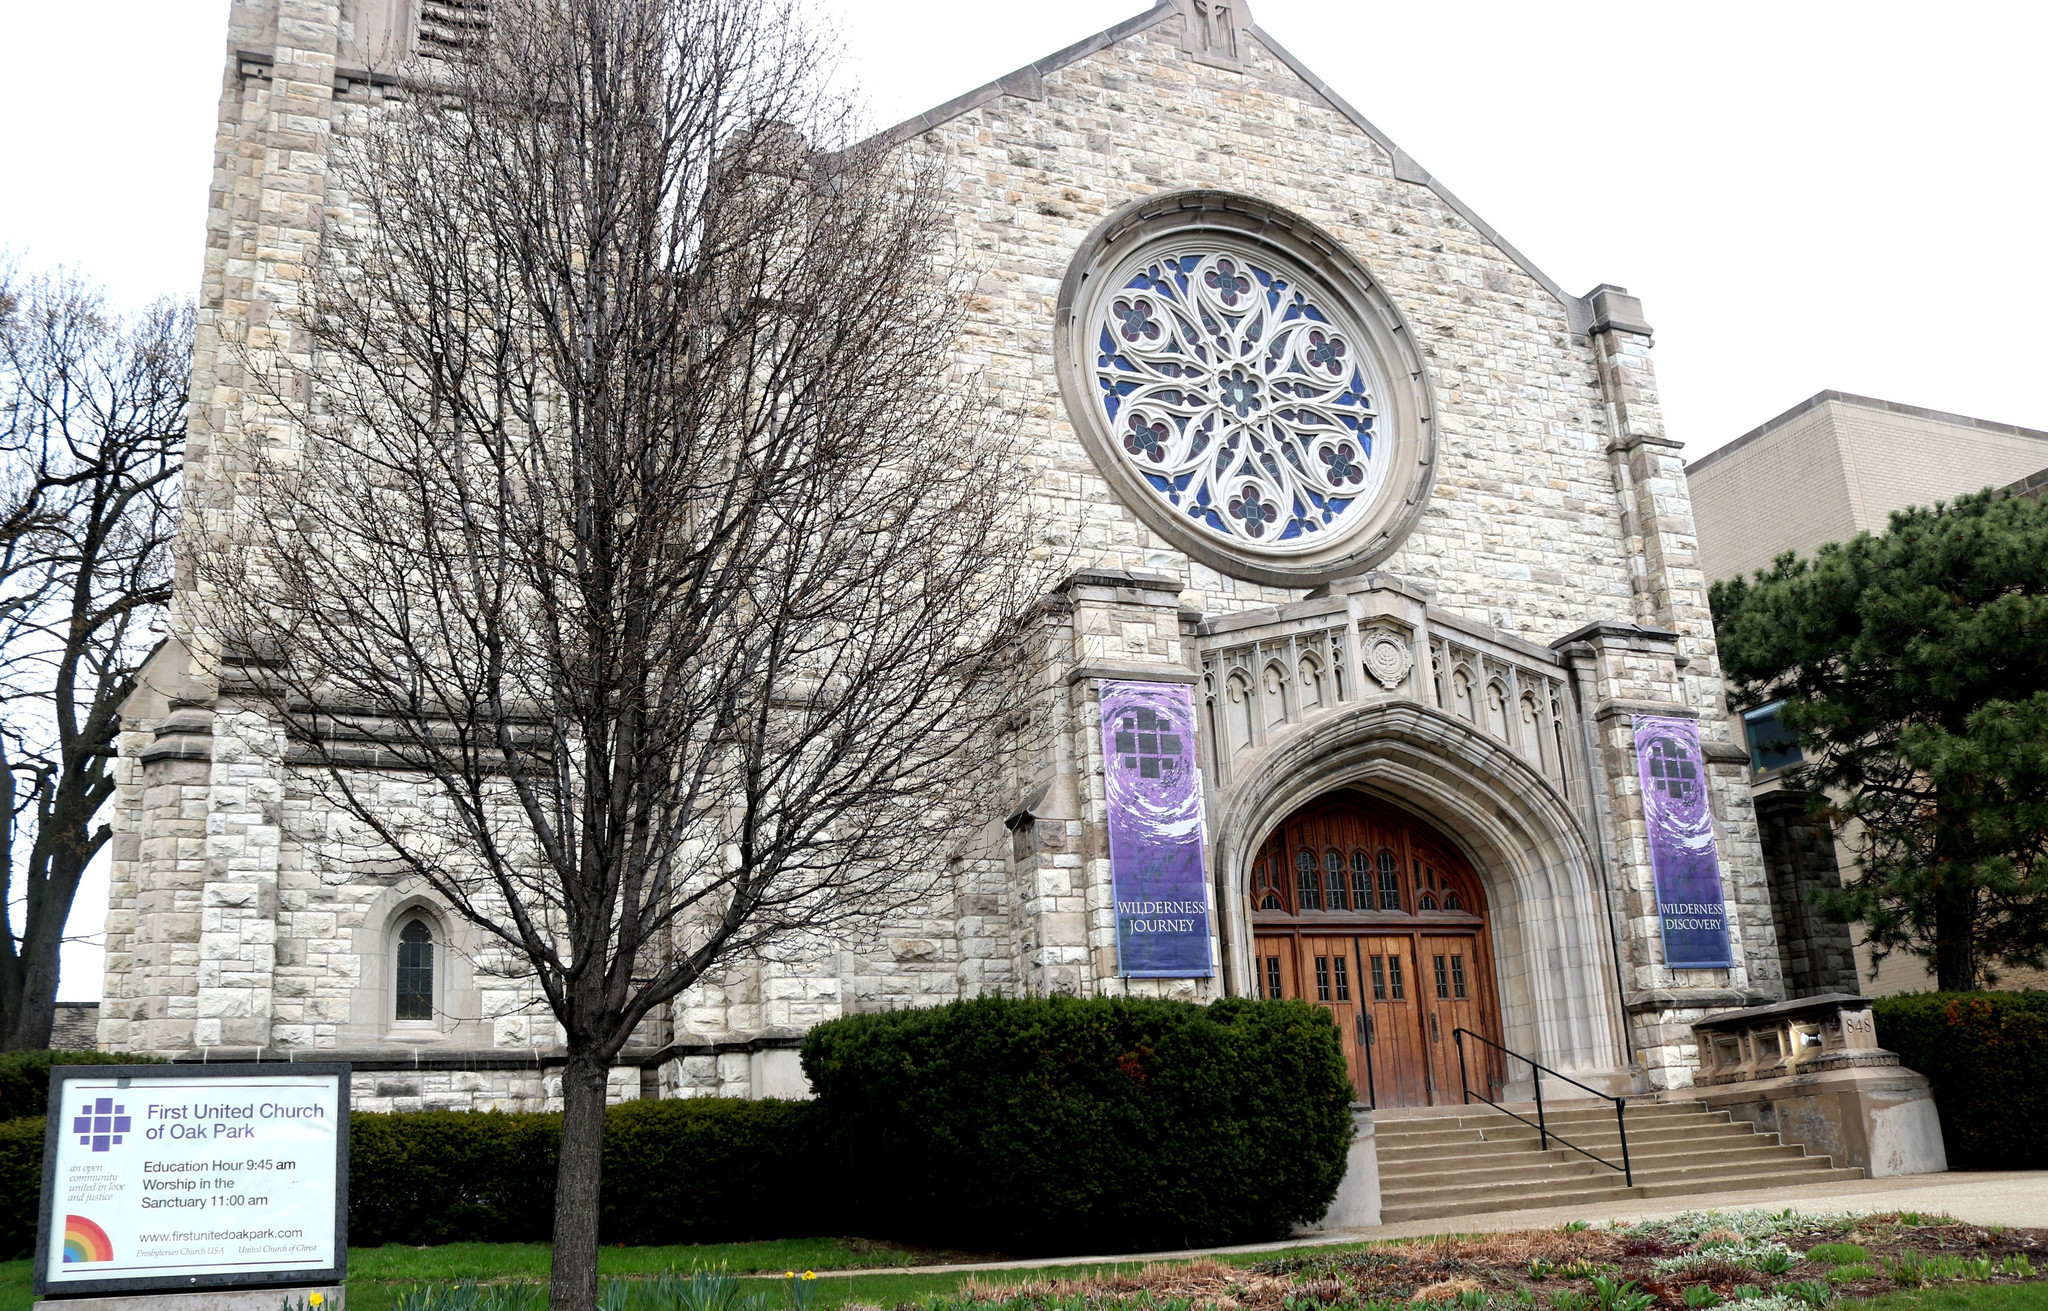 Oak Park church fasting from whiteness during Lent